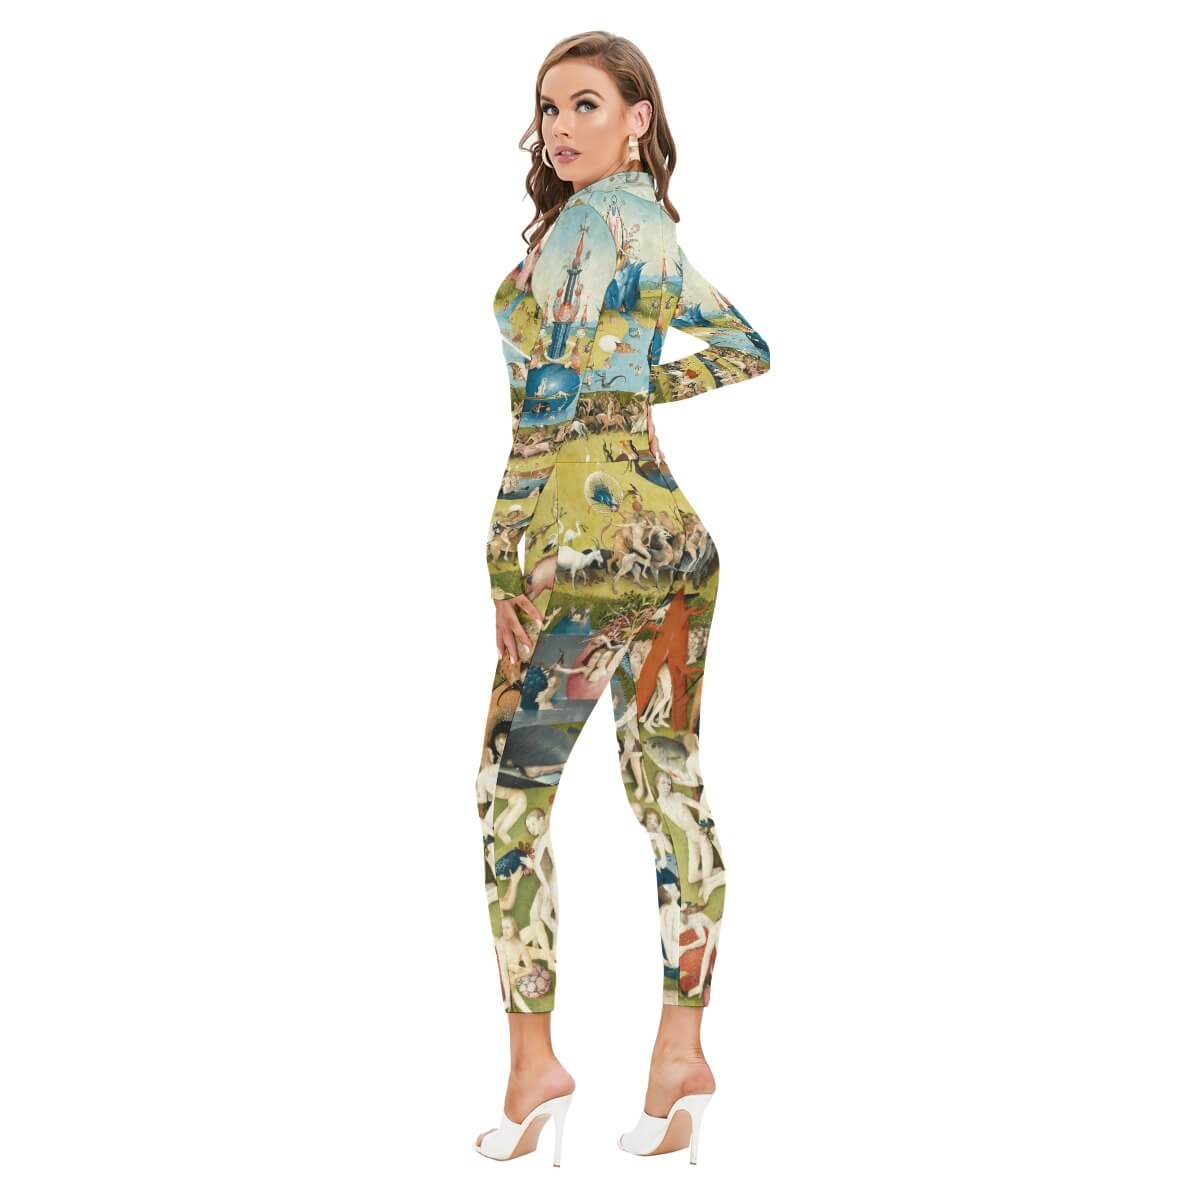 Hieronymus Bosch Earthly Delights Jumpsuit